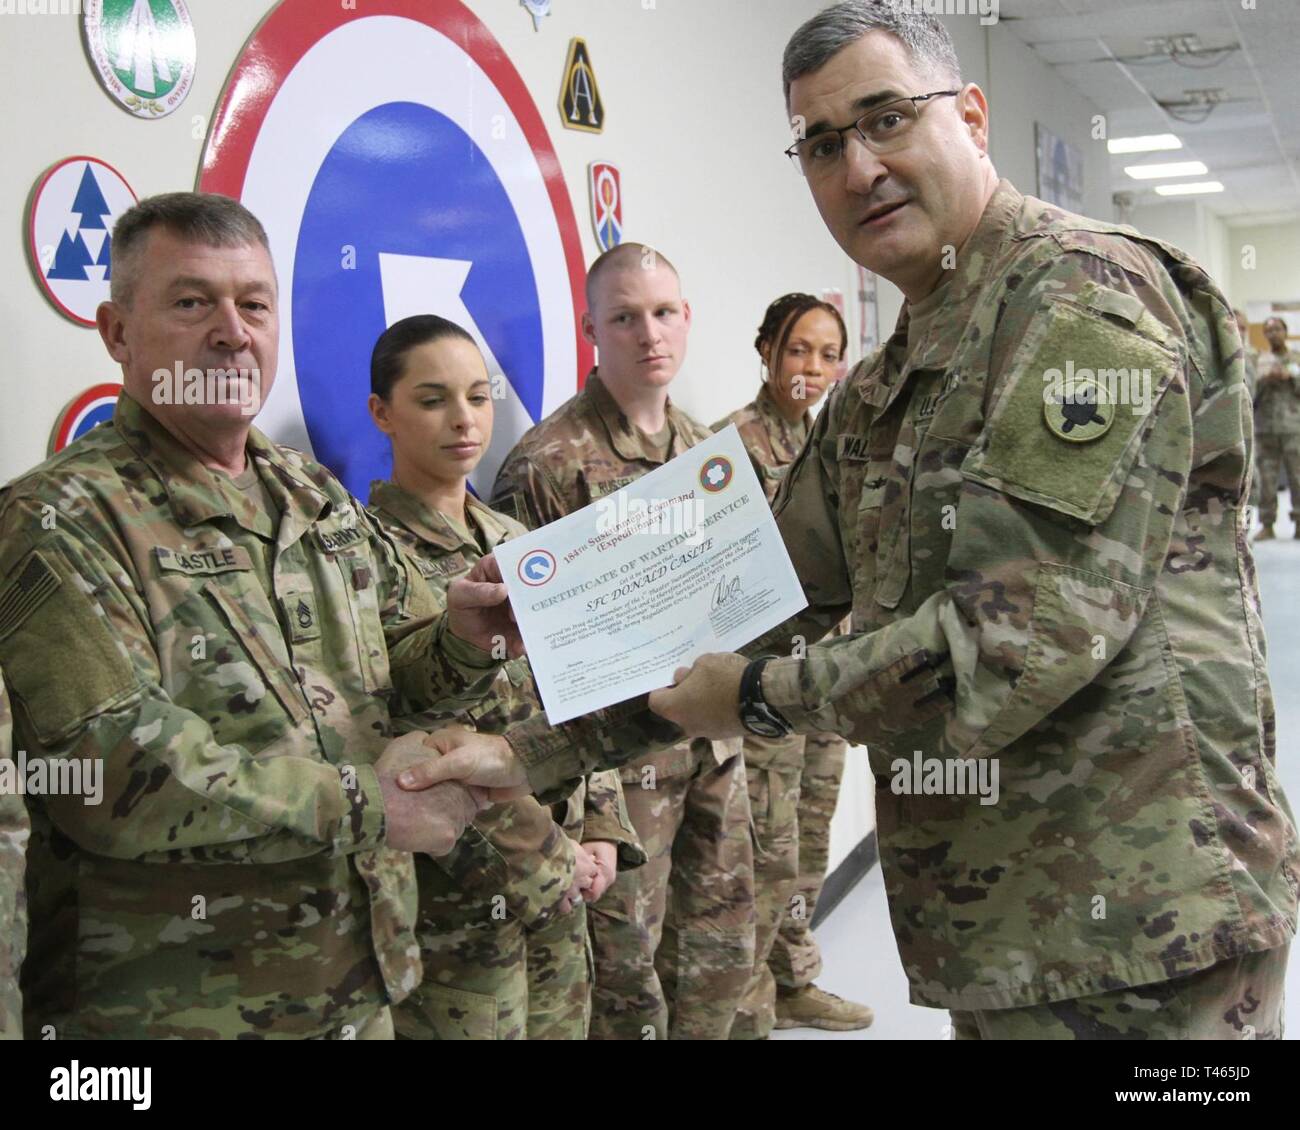 Brig. Gen. Clint E. Walker, commanding general of the 184th Sustainment Command, presents a certificate of wartime service to Sgt. 1st Class Donald Castle following the placement of the 184th ESC patch on his right shoulder at Camp Arifjan, Kuwait, Mar. 3, 2019. Stock Photo